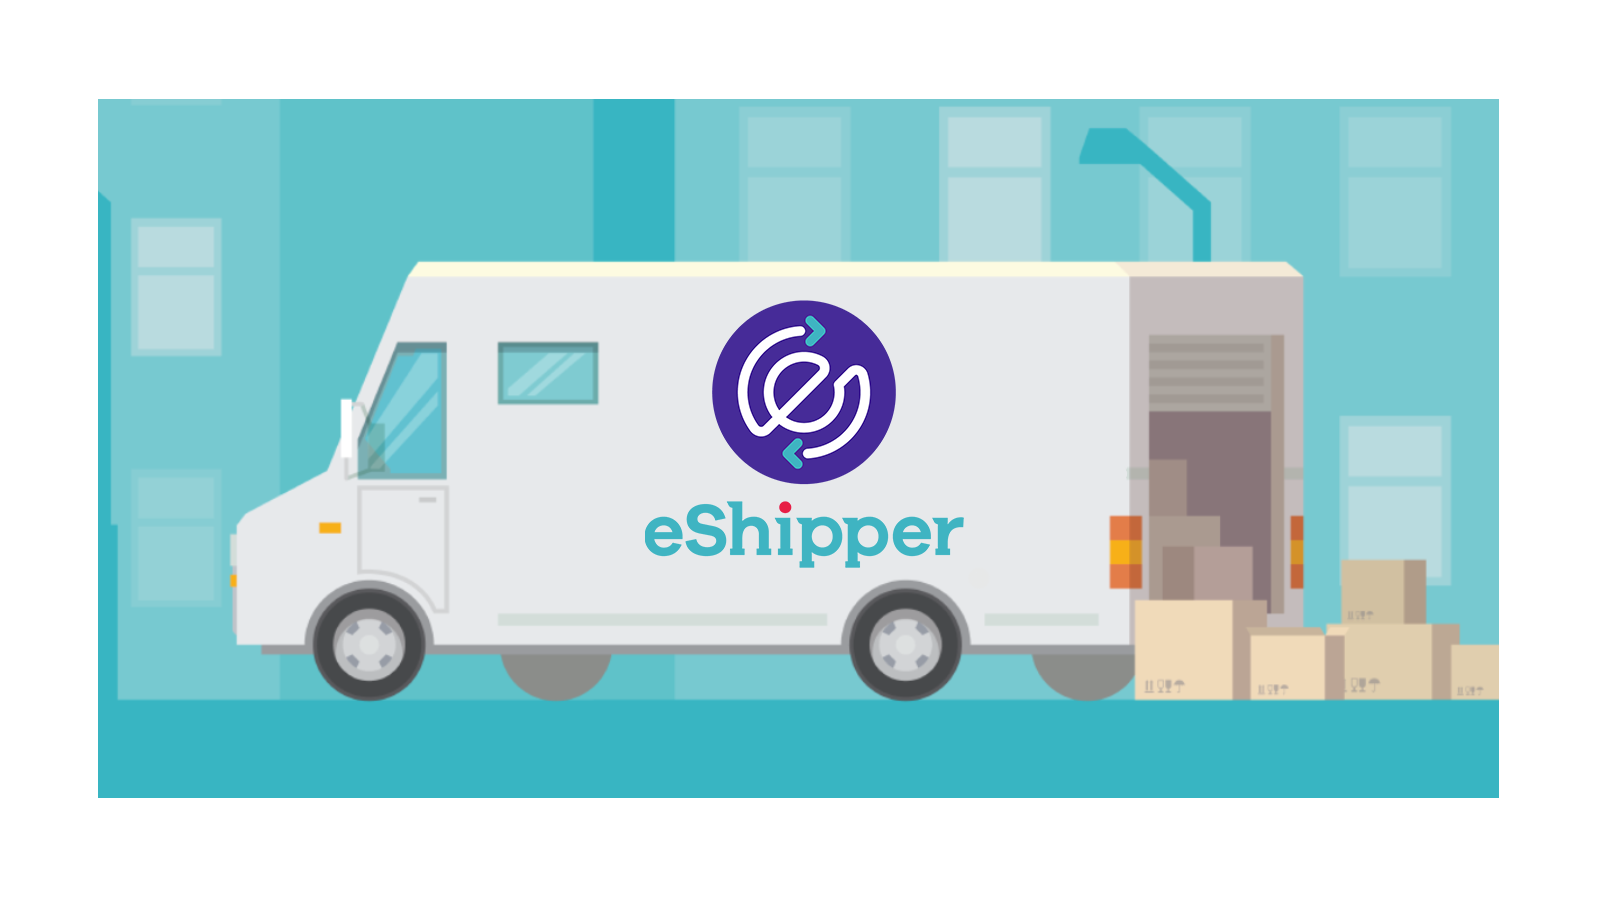 eShipper - Your One-stop Shipping & Fulfillment solution. Save up to ...